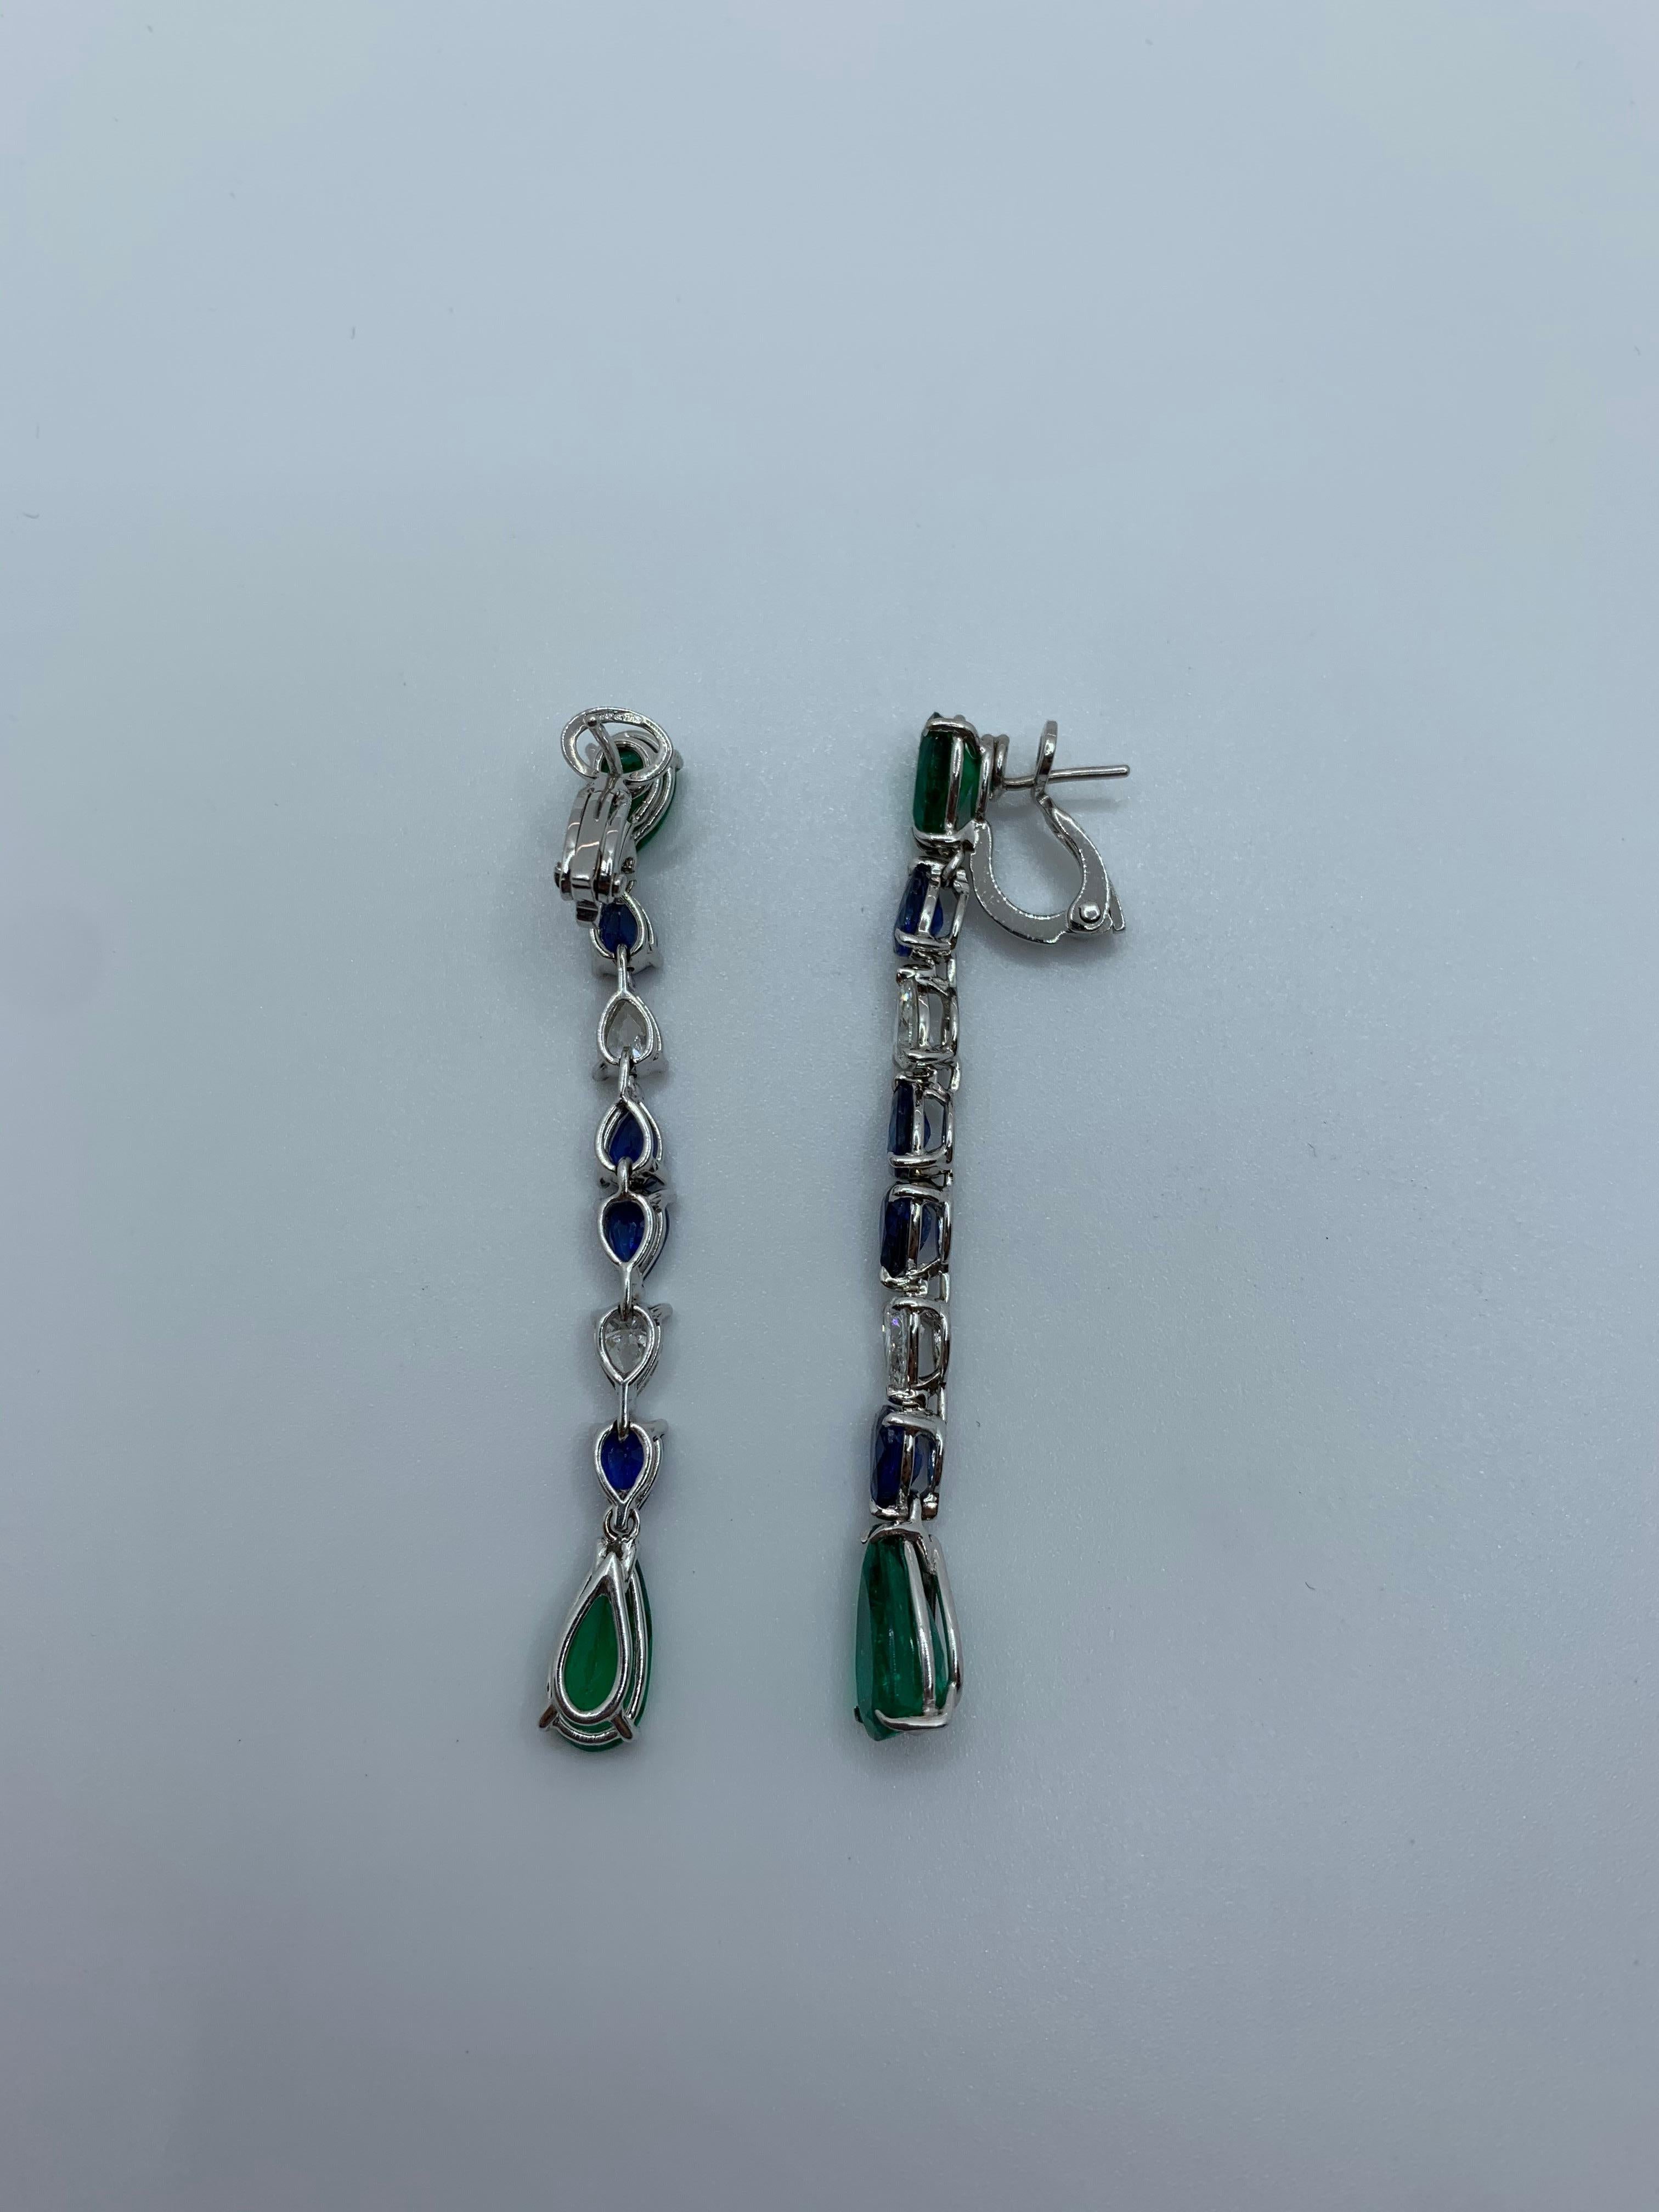 Pear Shaped Emerald, Sapphire and Diamond Earring. This Earring is part of a Suite and can be purchased individually.

Striking Earring and color combination. The gorgeous Colombian Emeralds matched with the beautiful Ceylon Sapphires play as if